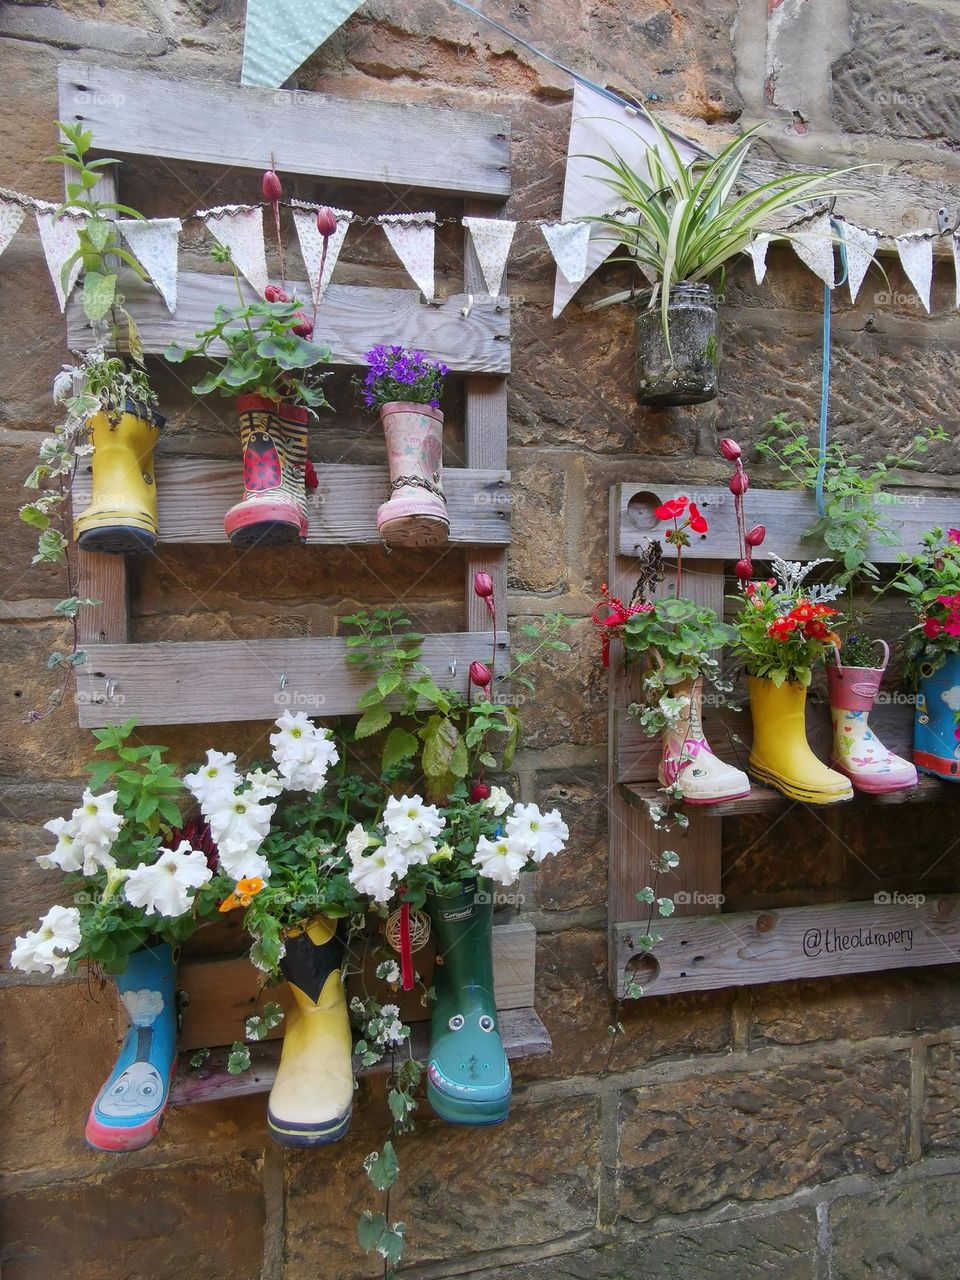 Original wall decor with flowers in colorful boots.